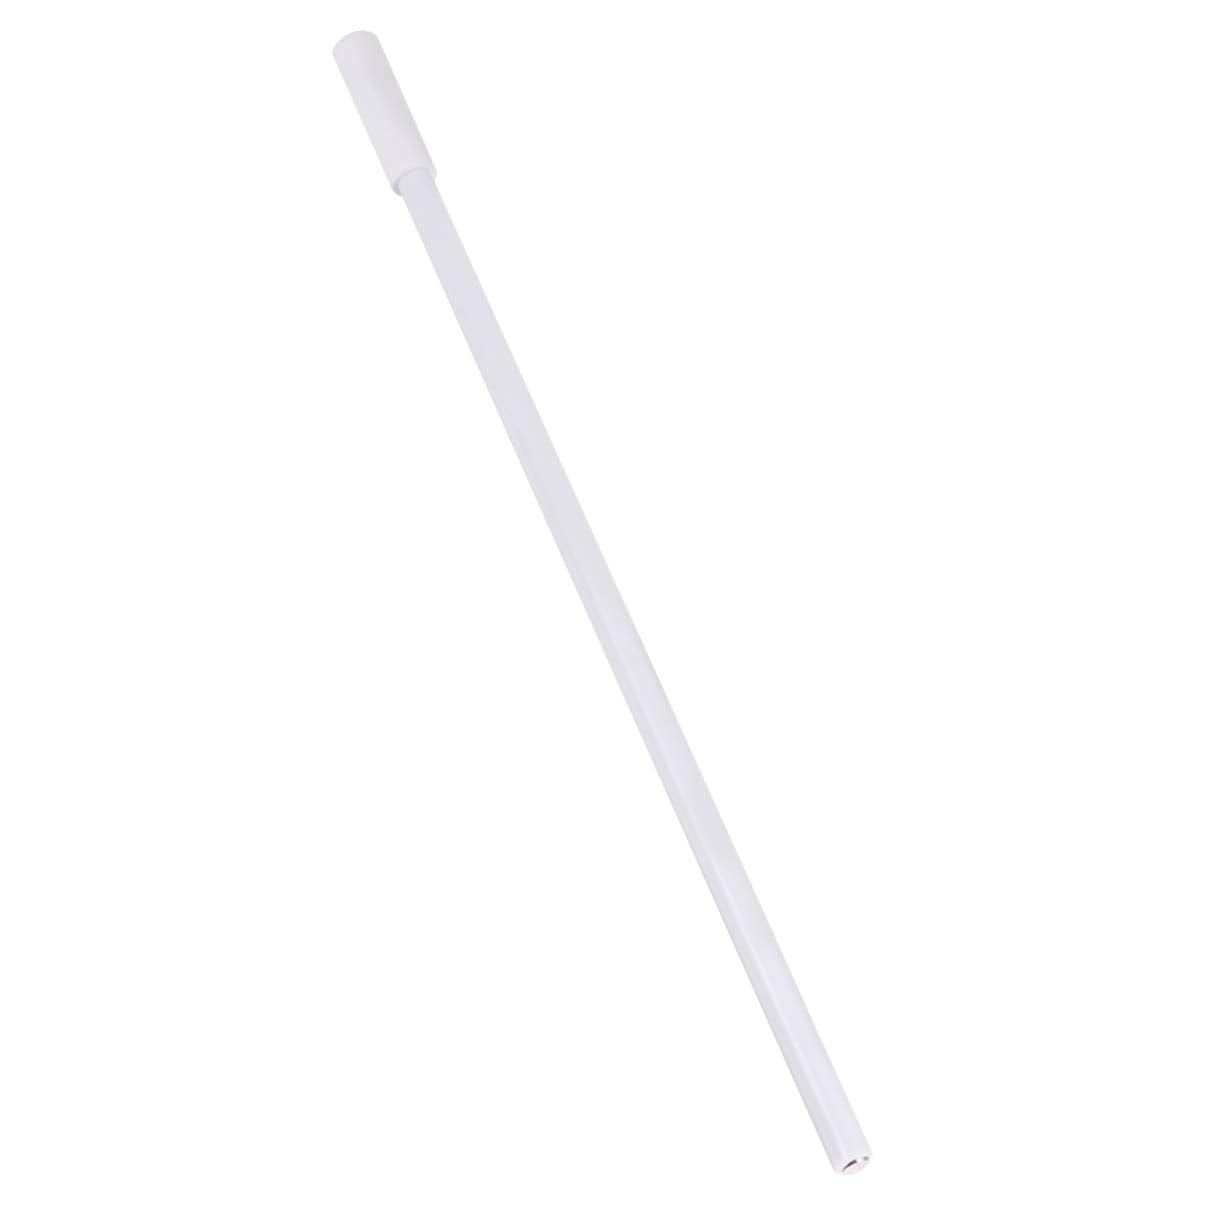 1 Pc Stirring Paddle Lab Equipment Laboratory Stirring Rods Magnetic Mixer Rod for Stirring Coffee Stirrers Magnetic Stirring Glass Stirring Stick Hot Plate Stirrer Glases White F4